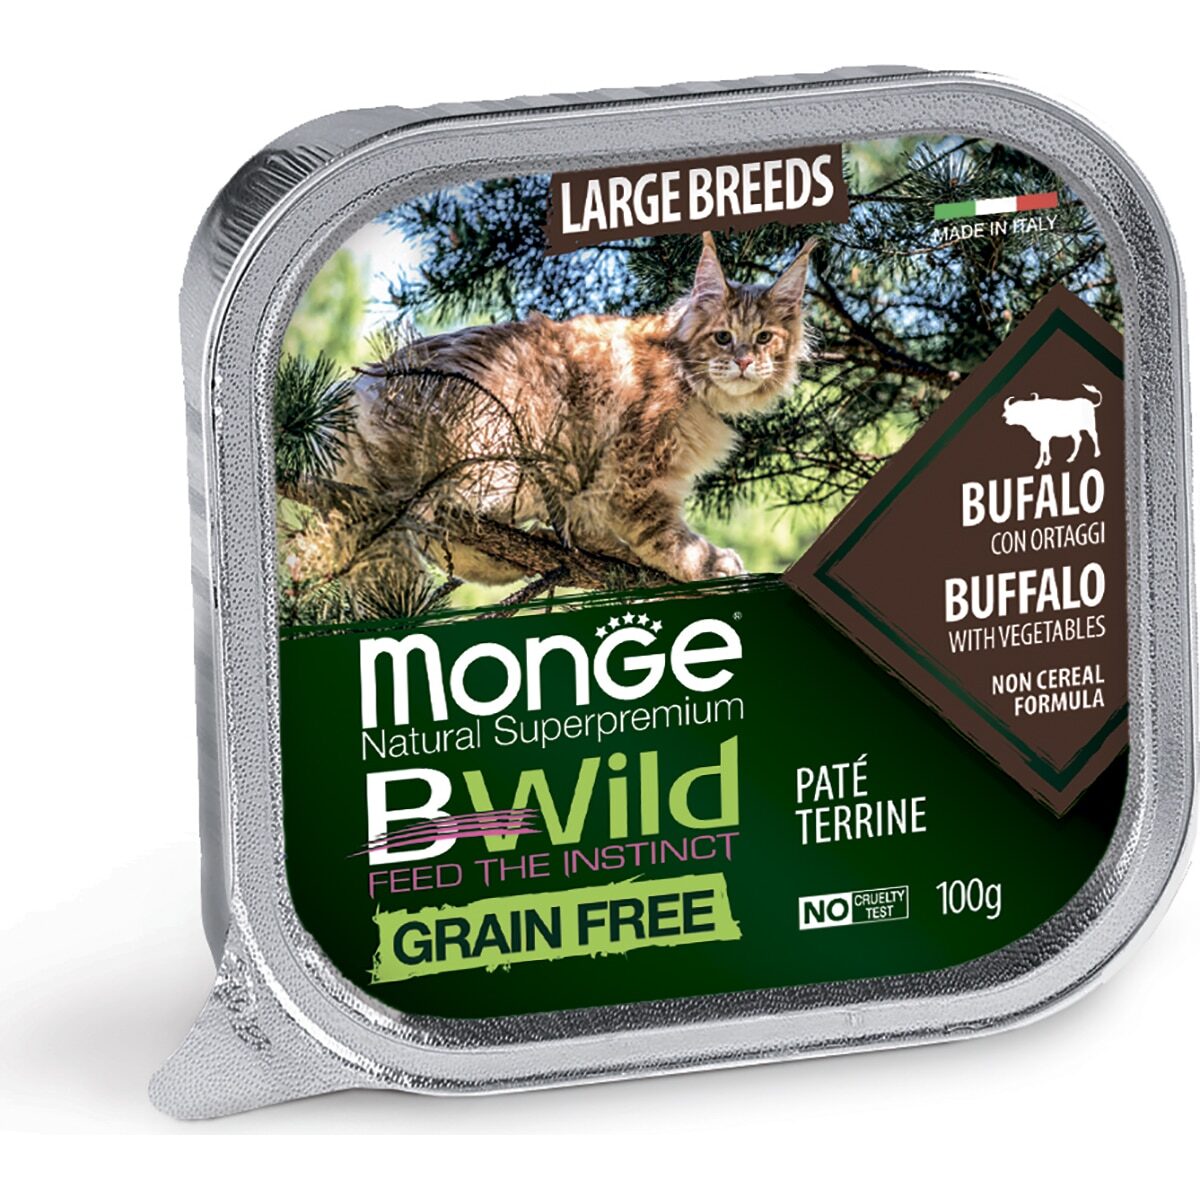 Monge Cat BWild Grain free Large Breeds Buffalo with vegetables (100г)